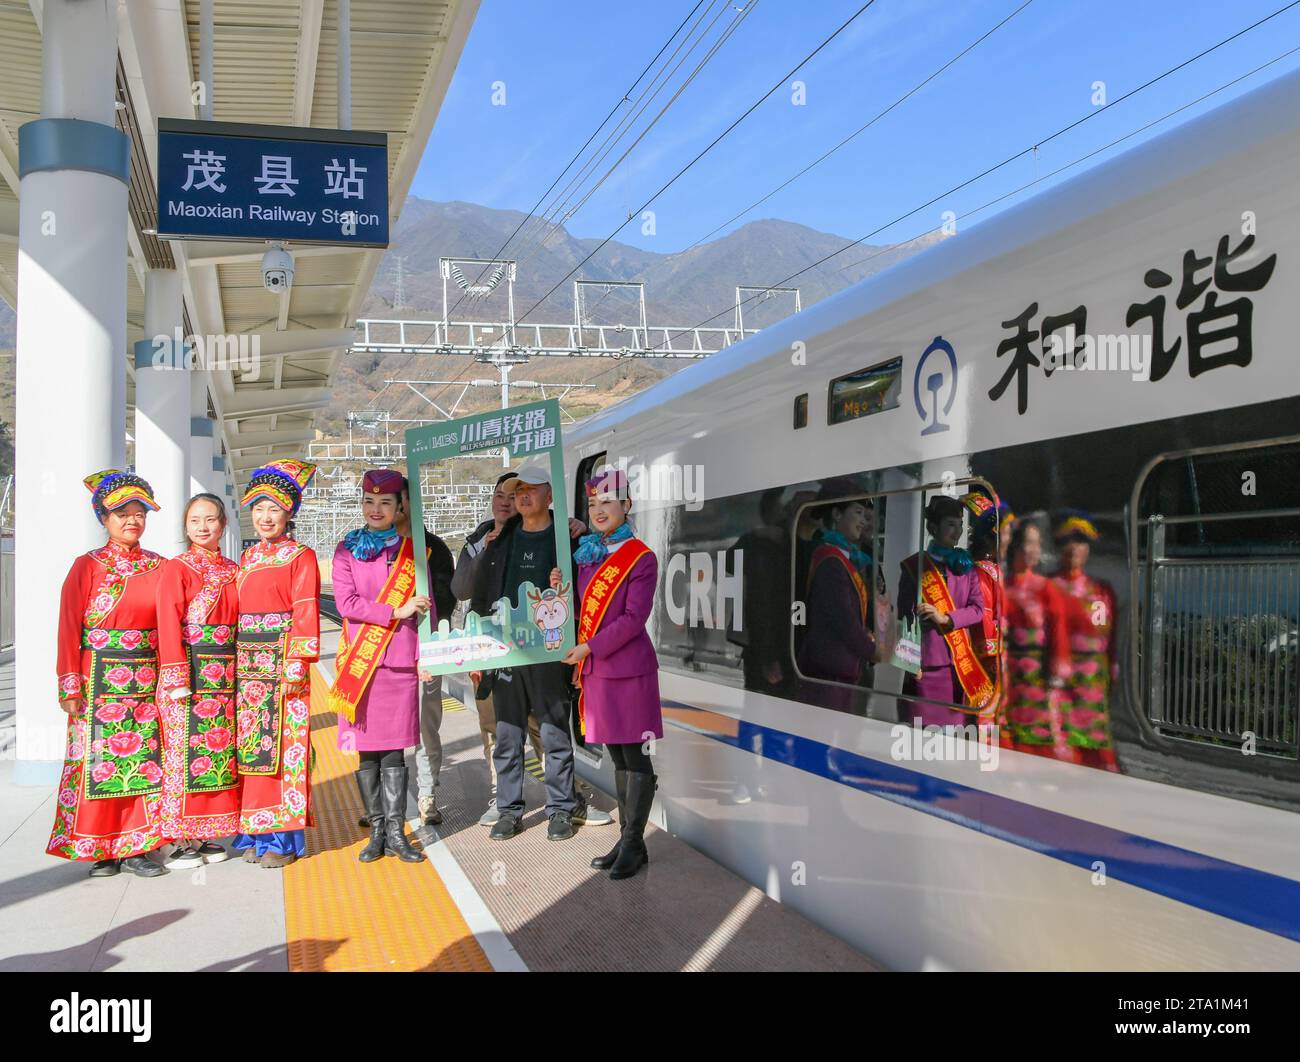 (231128) -- MAOXIAN, Nov. 28, 2023 (Xinhua) -- People pose for photos during the celebration for the operation of a section of the Sichuan-Qinghai railway at Maoxian railway station in Maoxian County, southwest China's Sichuan Province, Nov. 28, 2023. A 238-km section of the Sichuan-Qinghai railway in western China became operational on Tuesday after 12 years of construction.   The railway crosses the rugged, earthquake-prone plateau region in northwest Sichuan, and takes a detour to avoid disturbing the Giant Panda National Park.      The Sichuan-Qinghai railway will eventually stretch northw Stock Photo